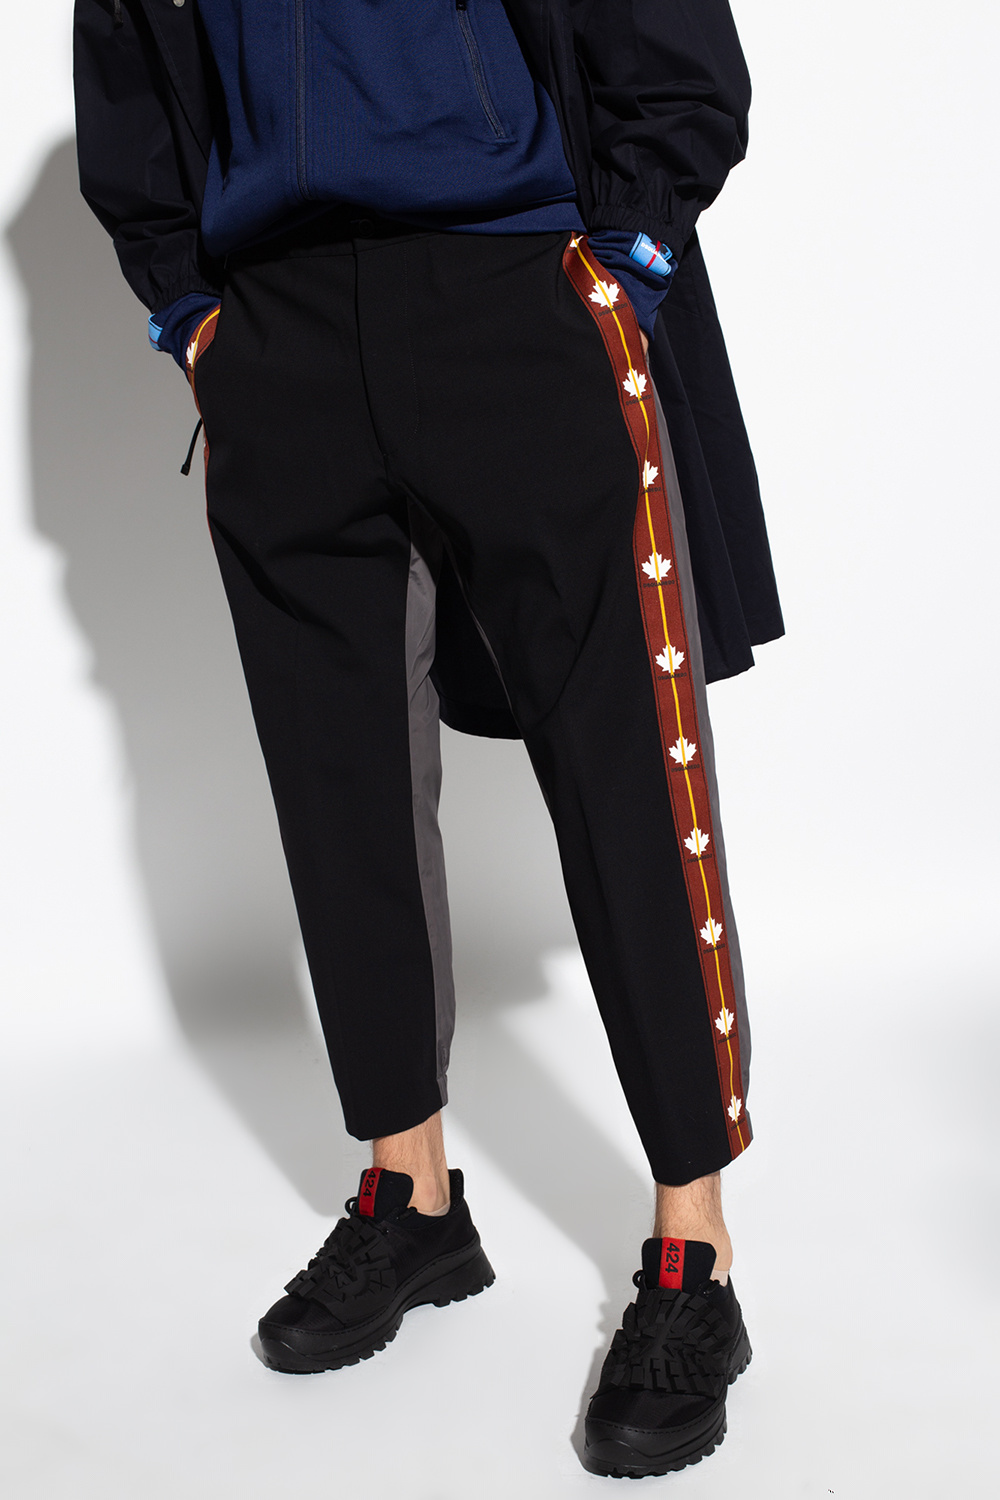 Dsquared2 ‘Hockney Fit’ trousers